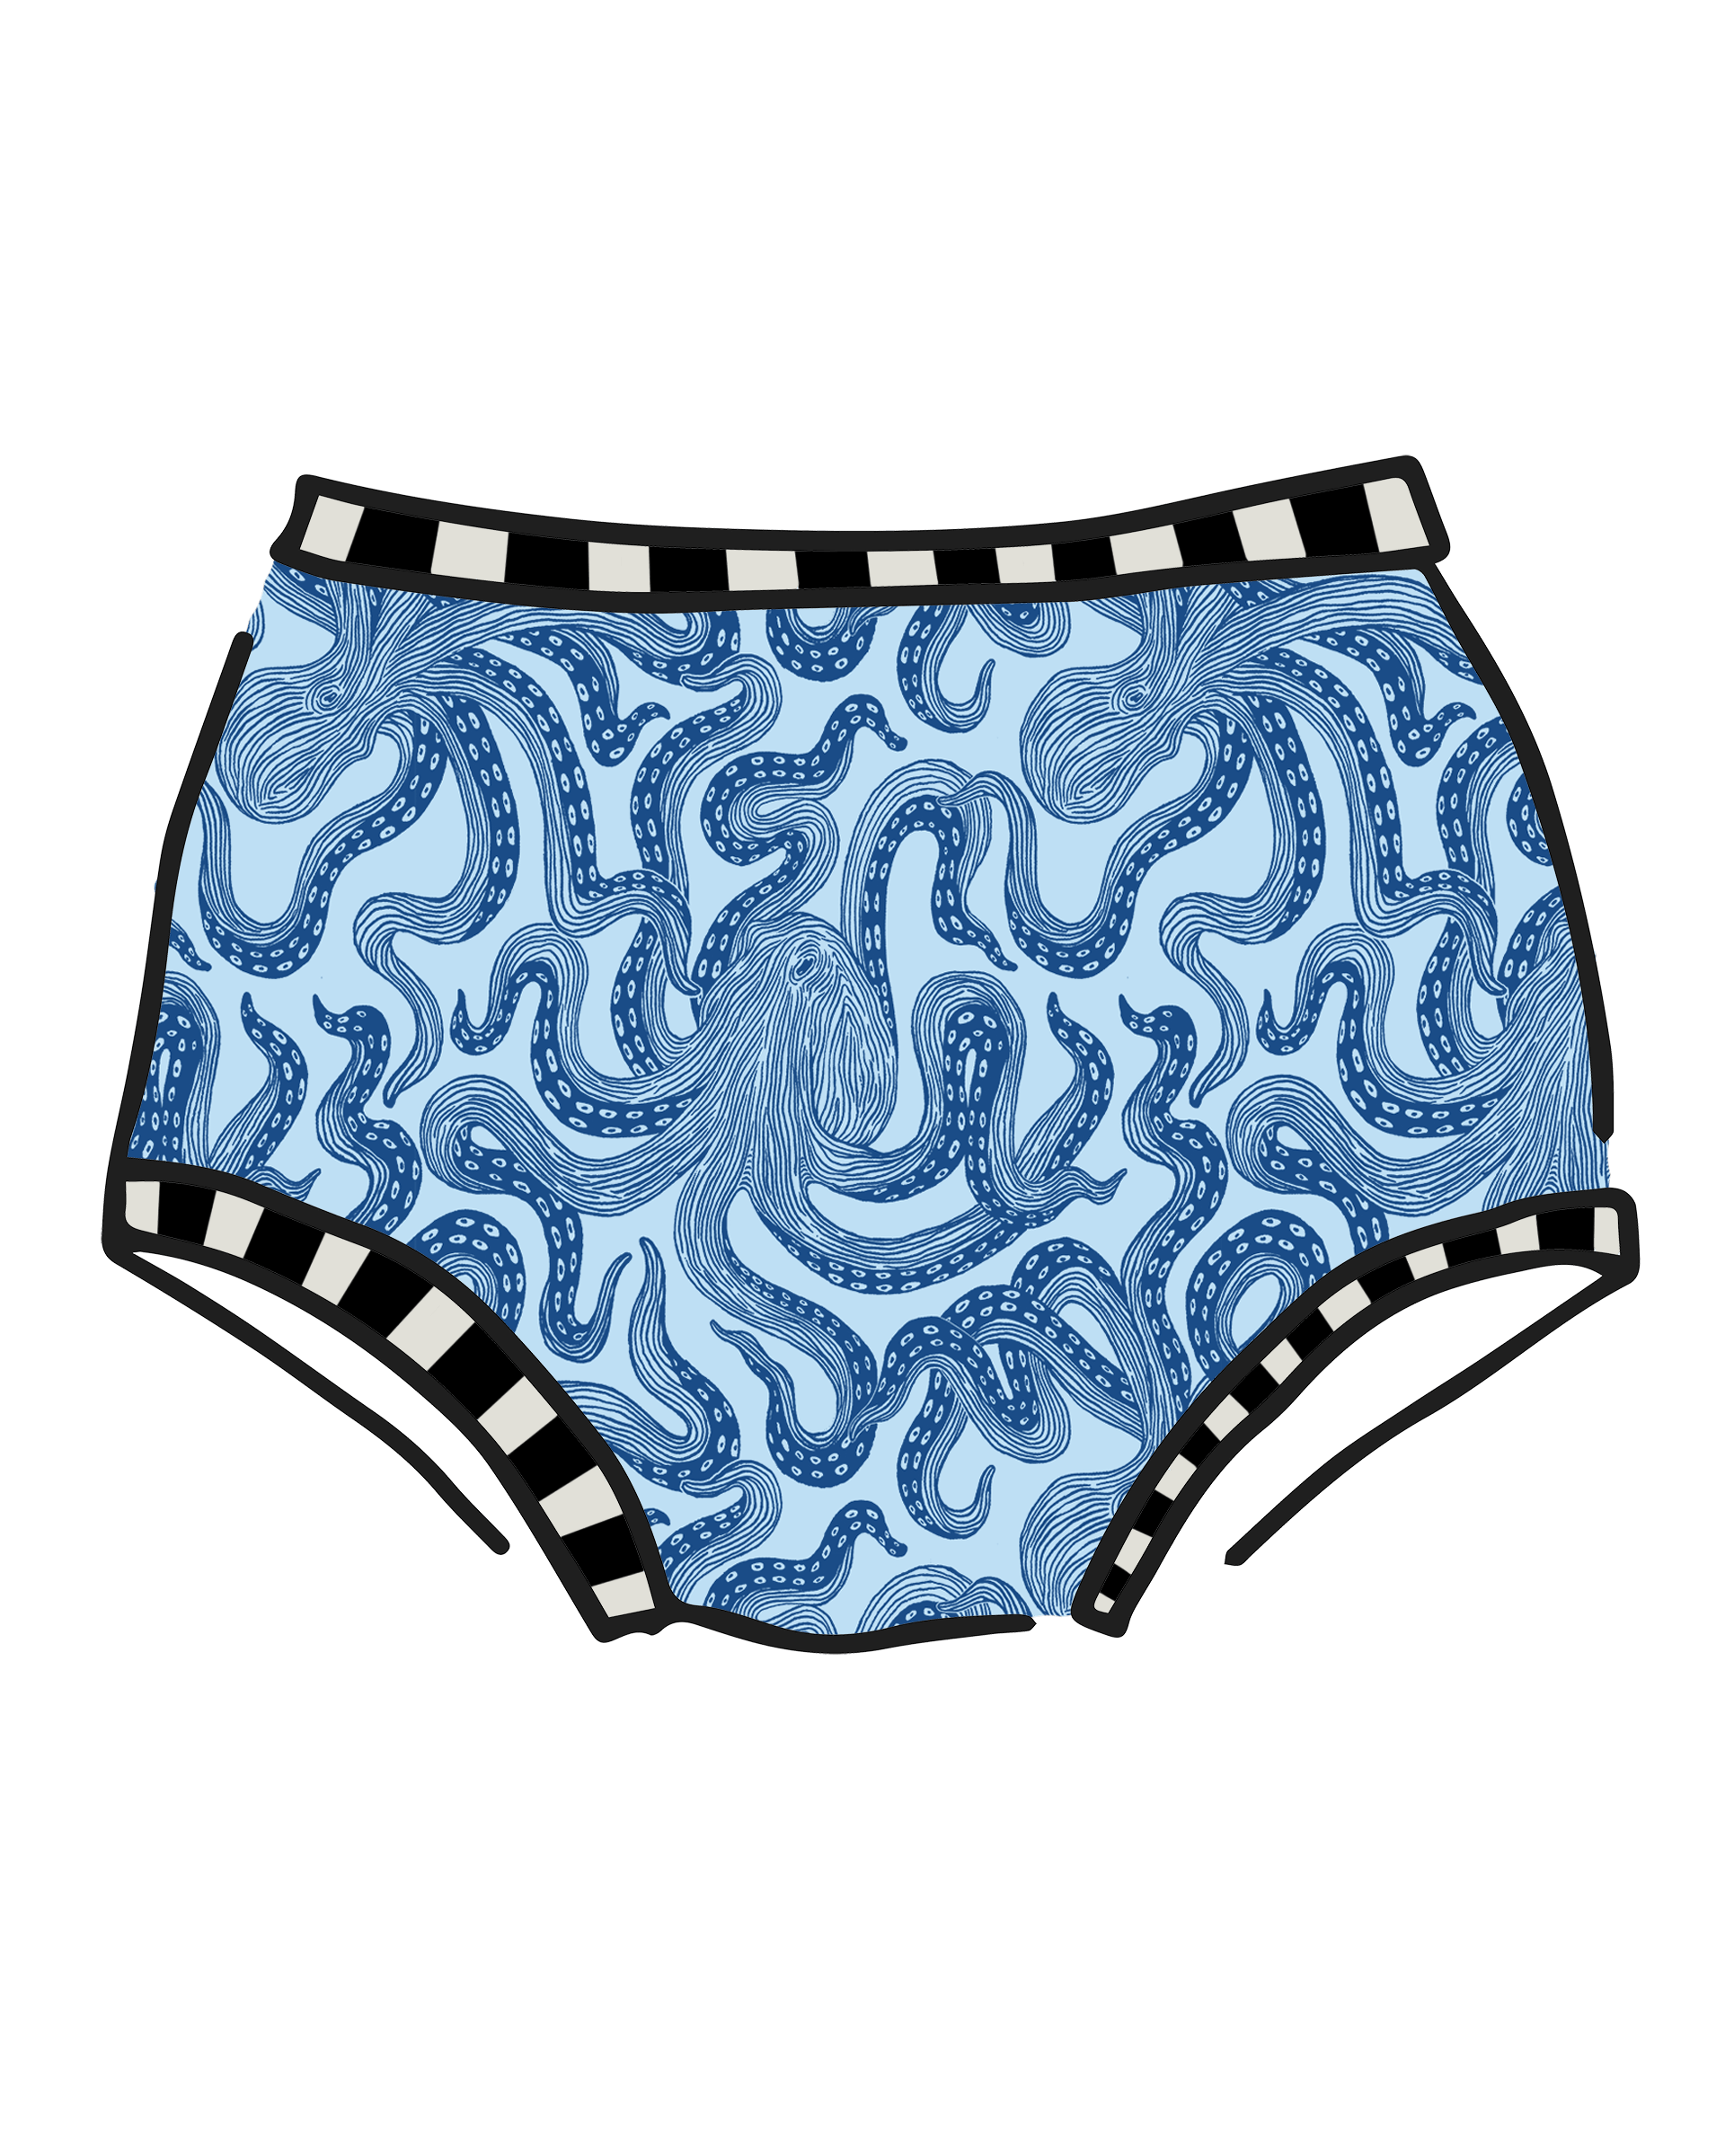 Drawing of Thunderpants Original style underear in Octo-Pants print - dark blue octopus on light blue fabric.